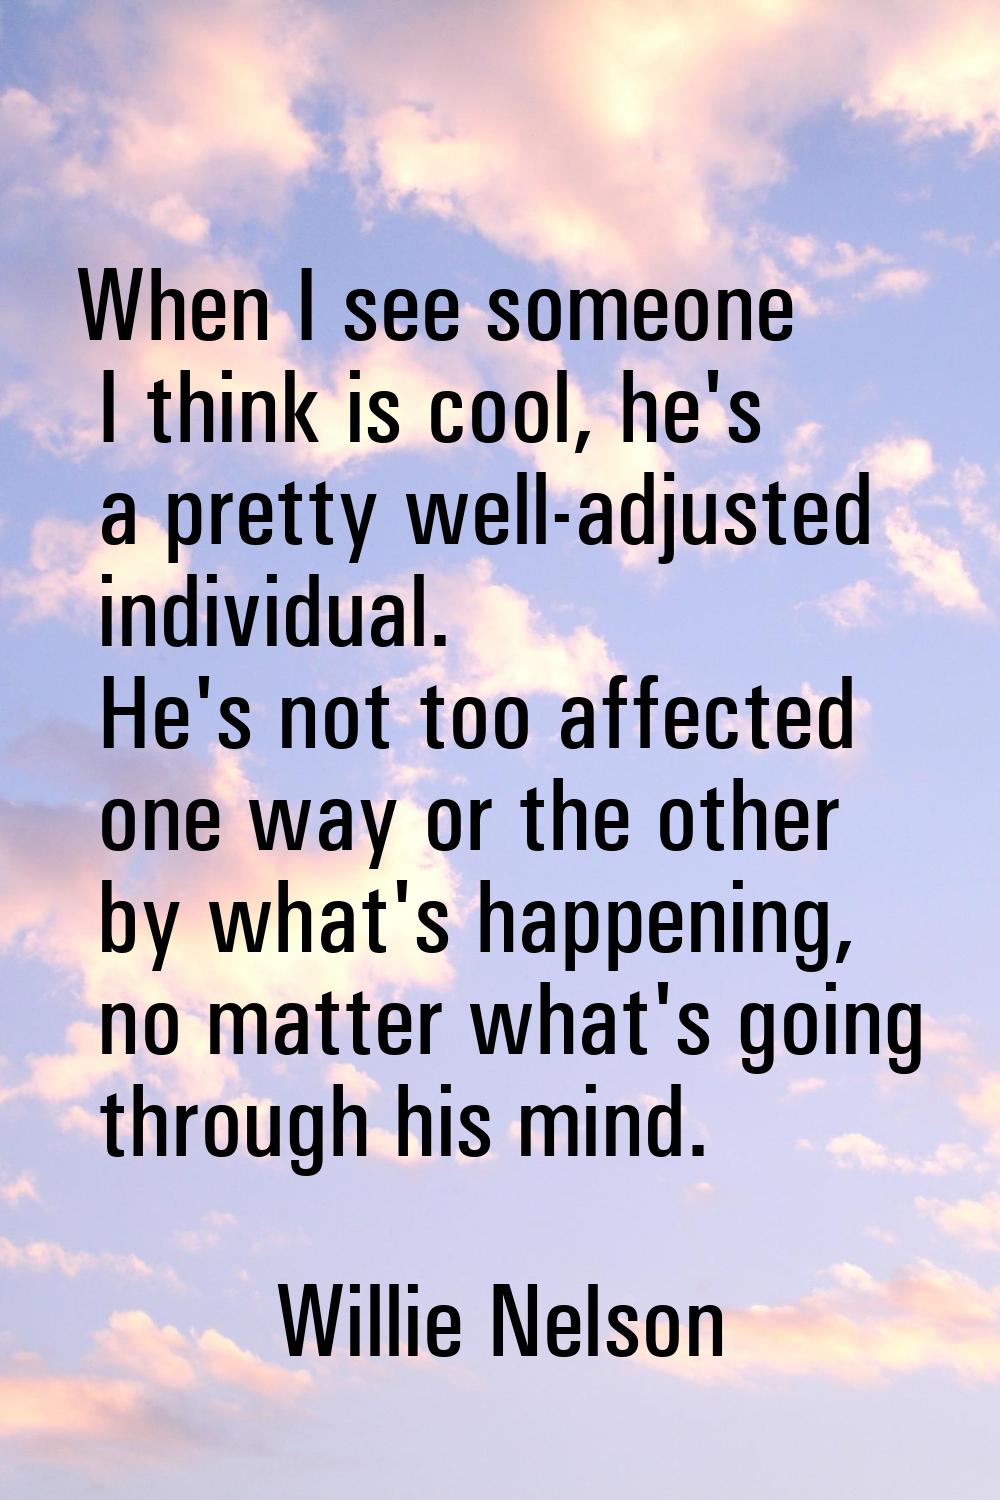 When I see someone I think is cool, he's a pretty well-adjusted individual. He's not too affected o